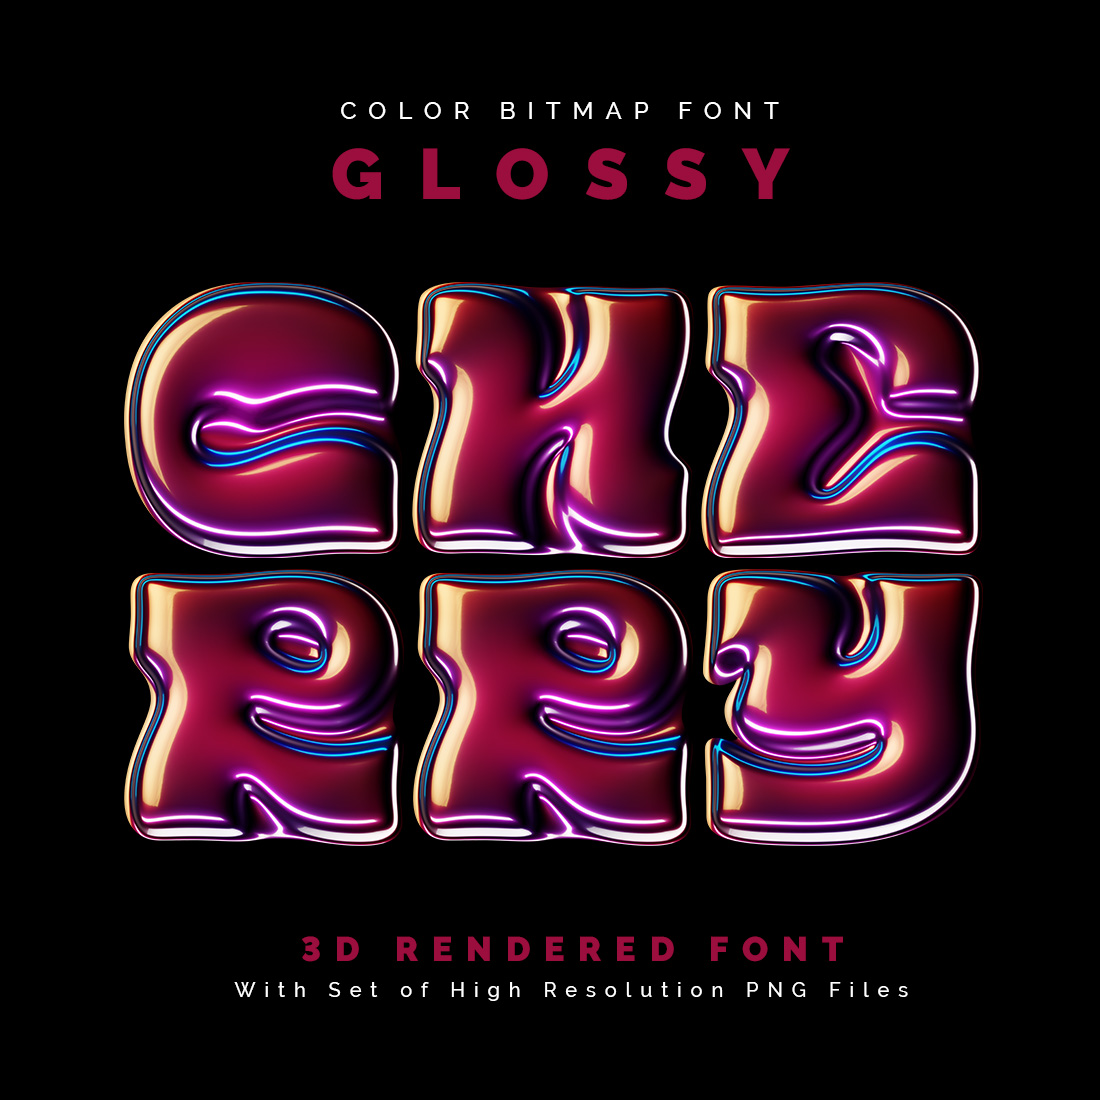 Glossy Cherry — Color Bitmap Font cover image.